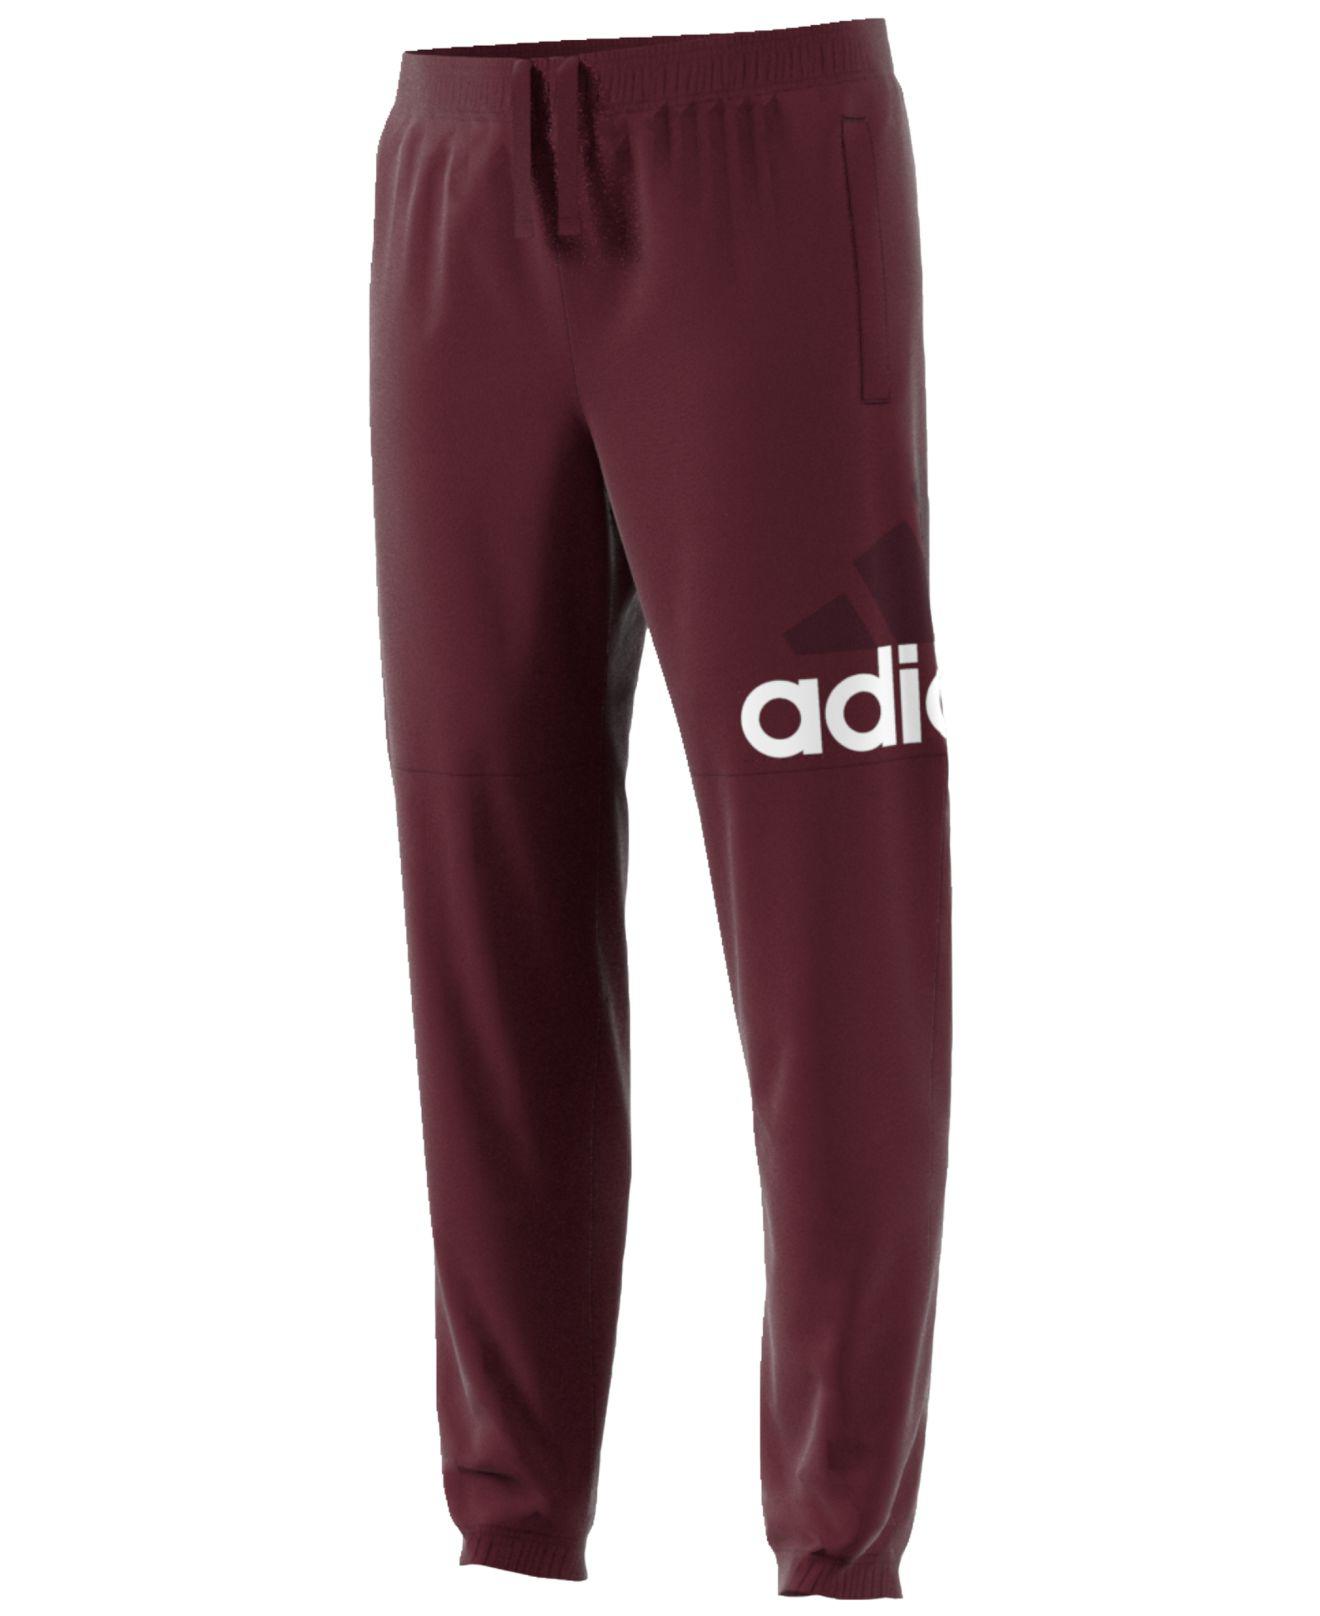 adidas essential jersey pants